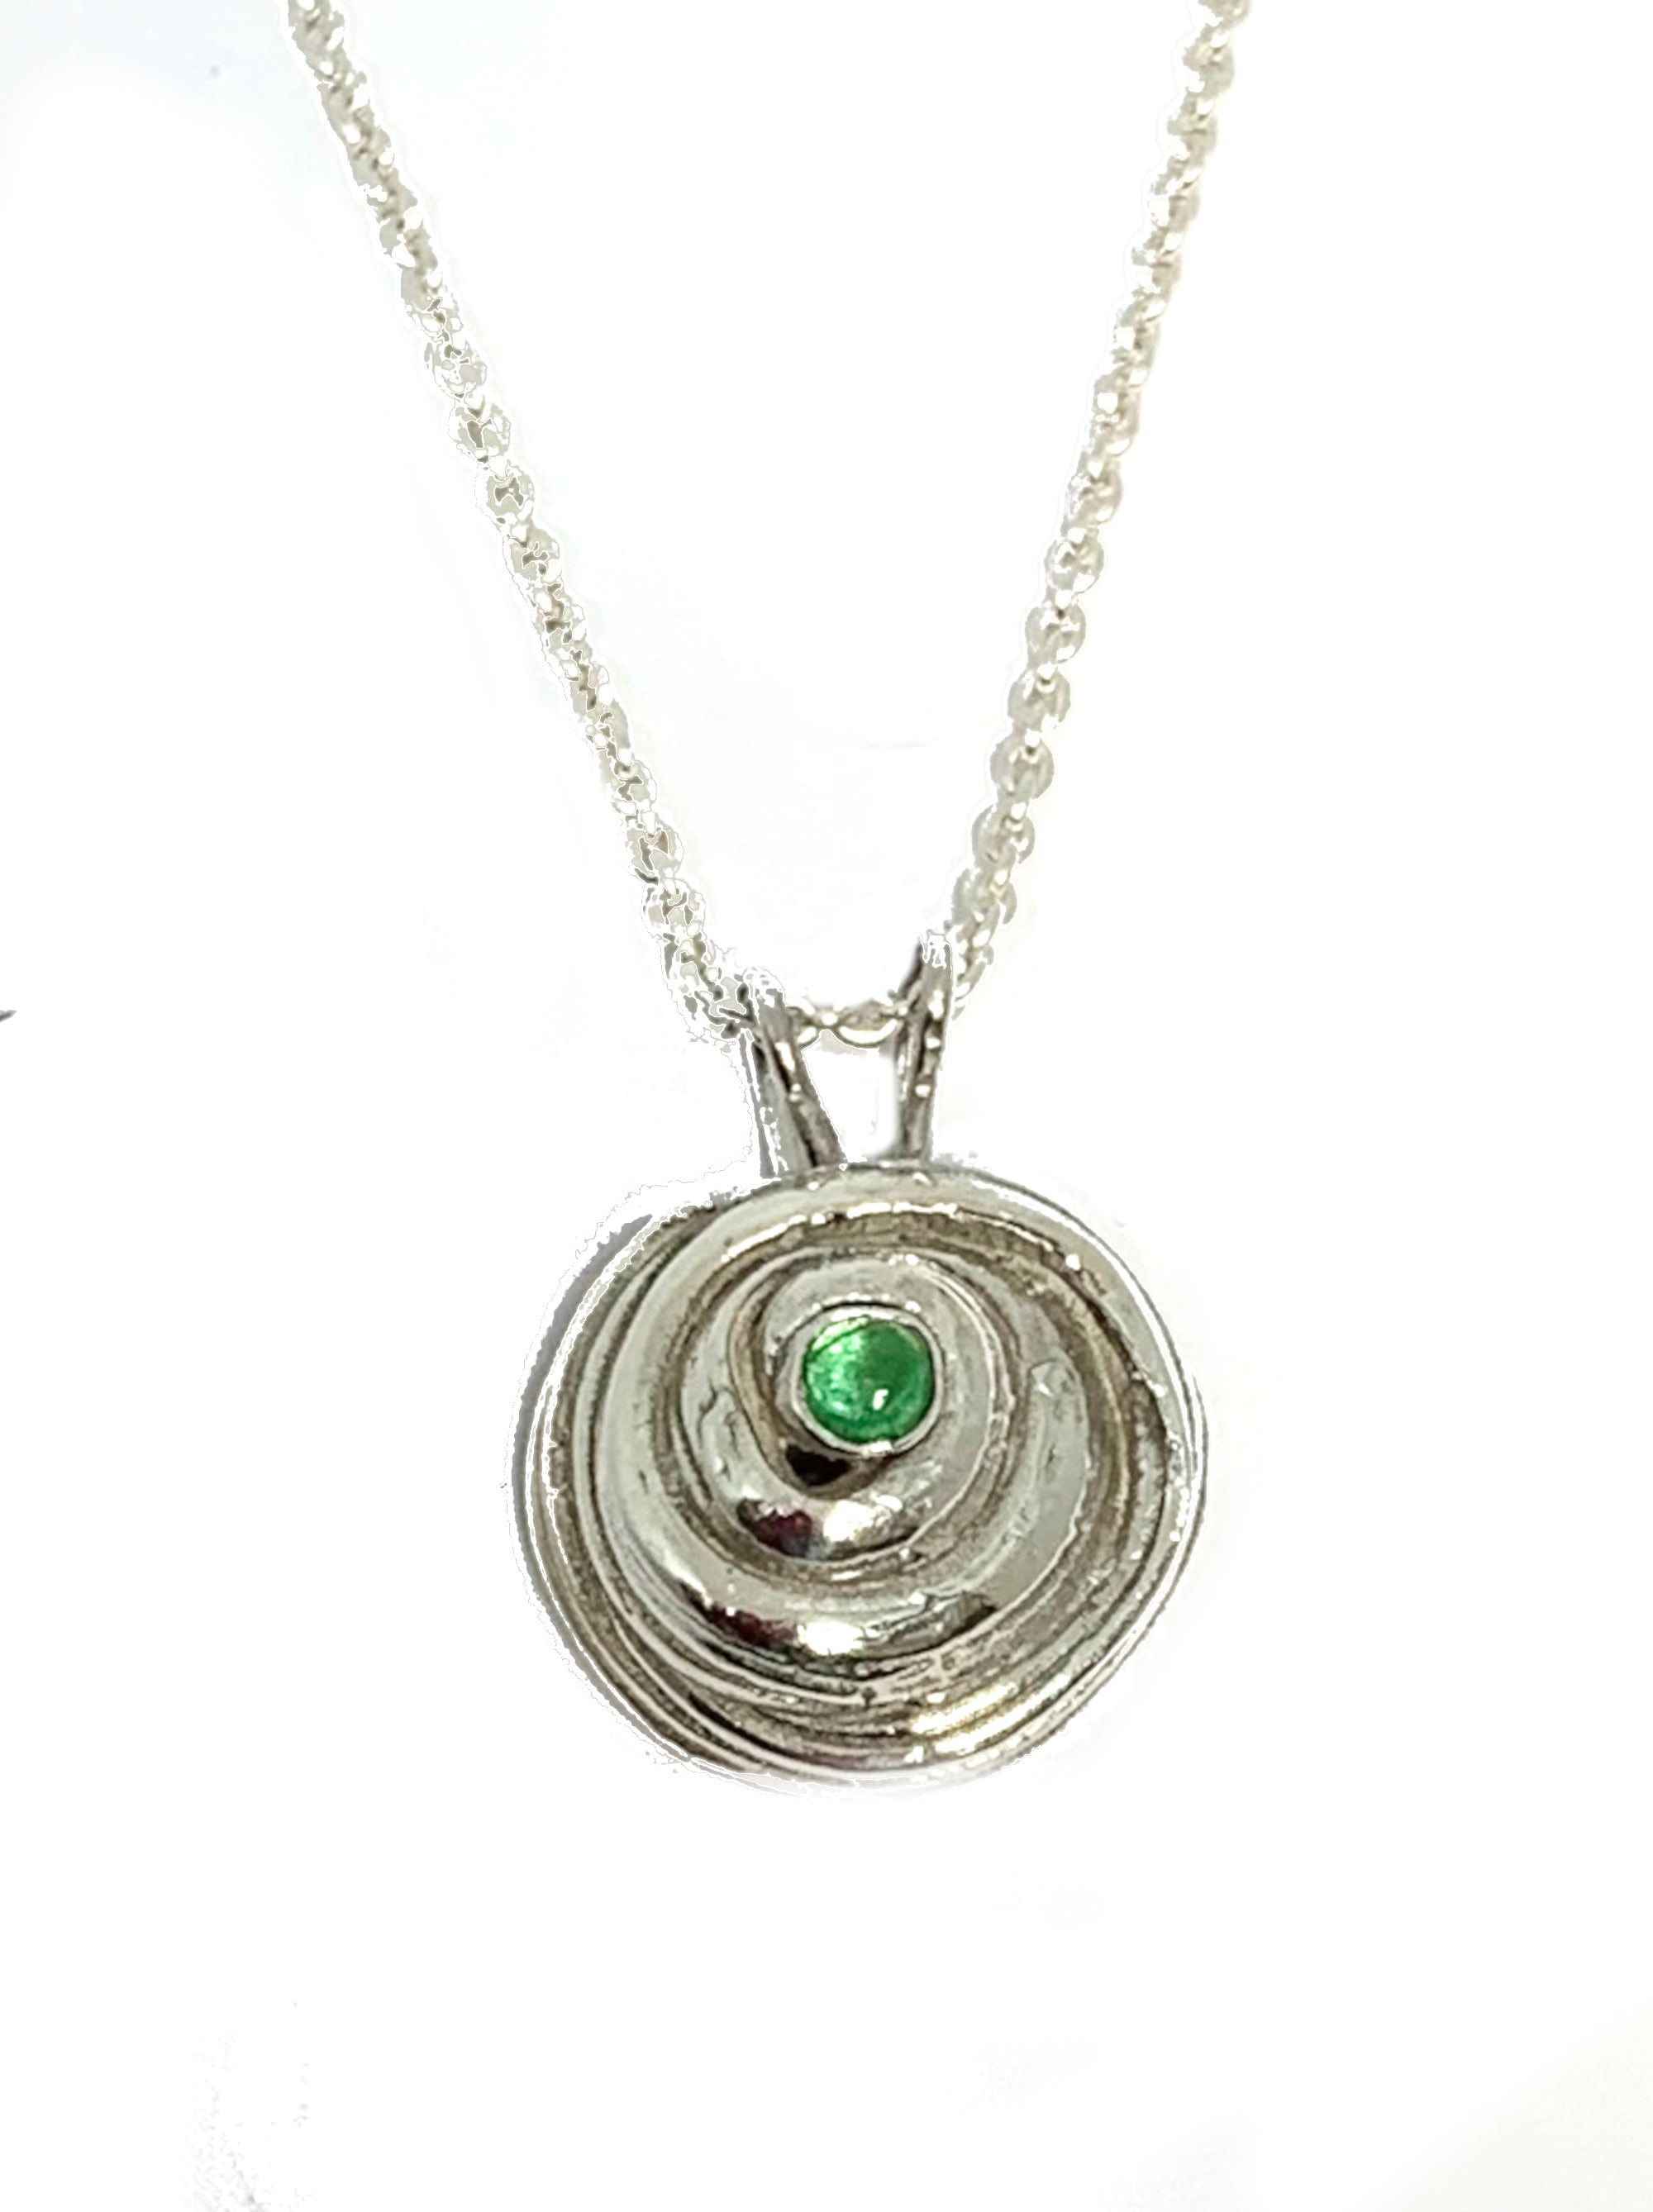 Emerald Rose Pendant Necklace in Sterling Silver - Mitsuro Hikime Method